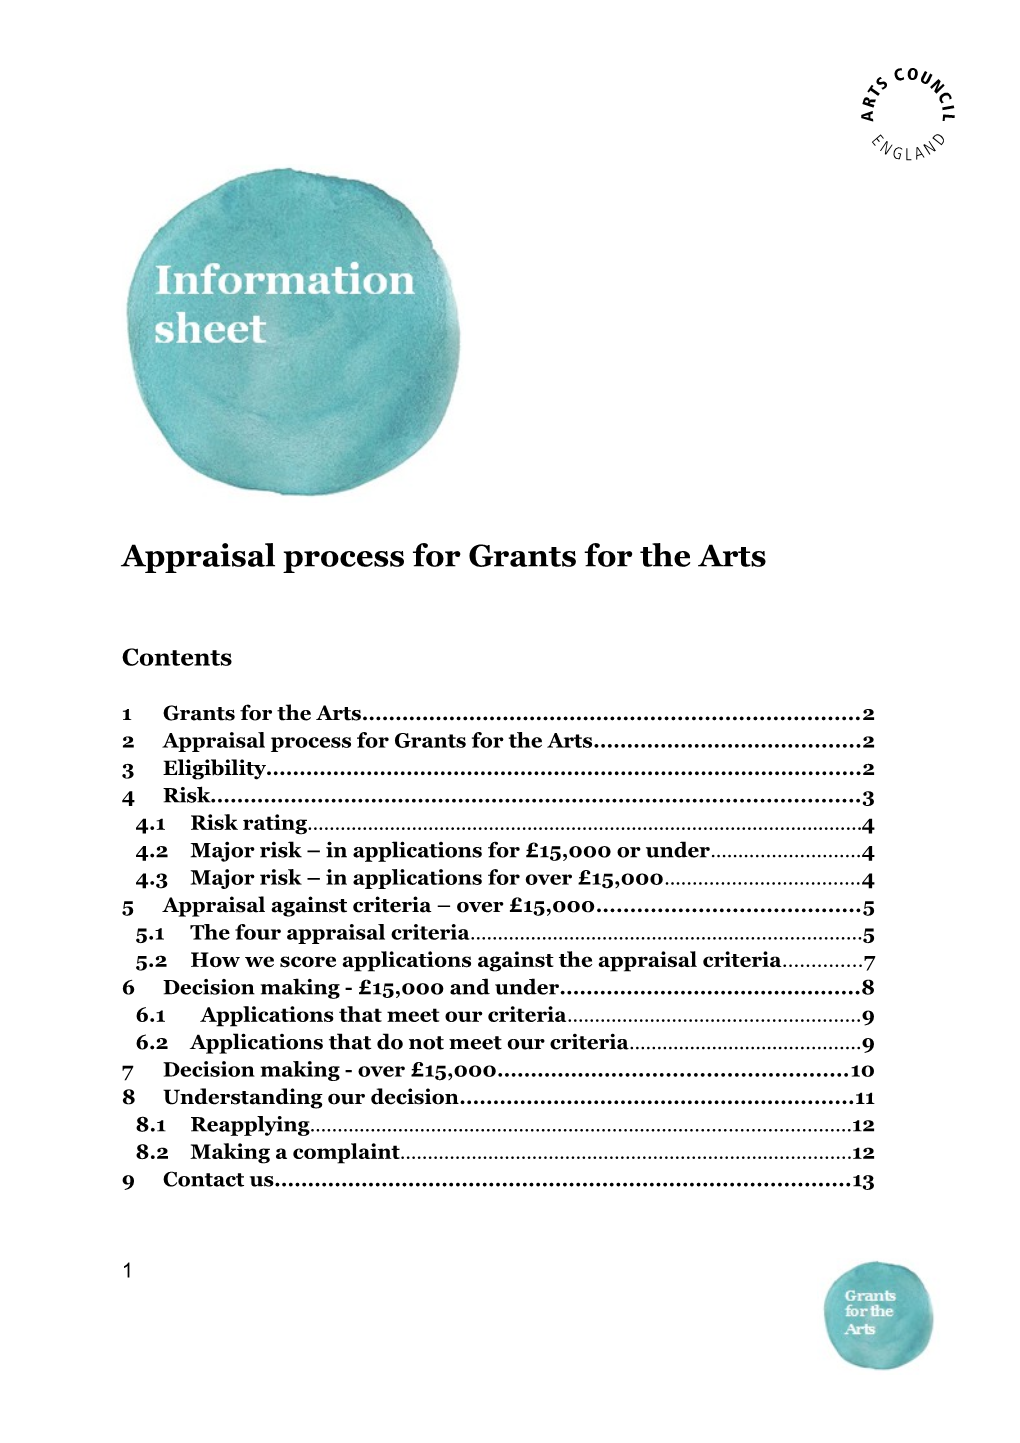 Appraisal Process for Grants for the Arts